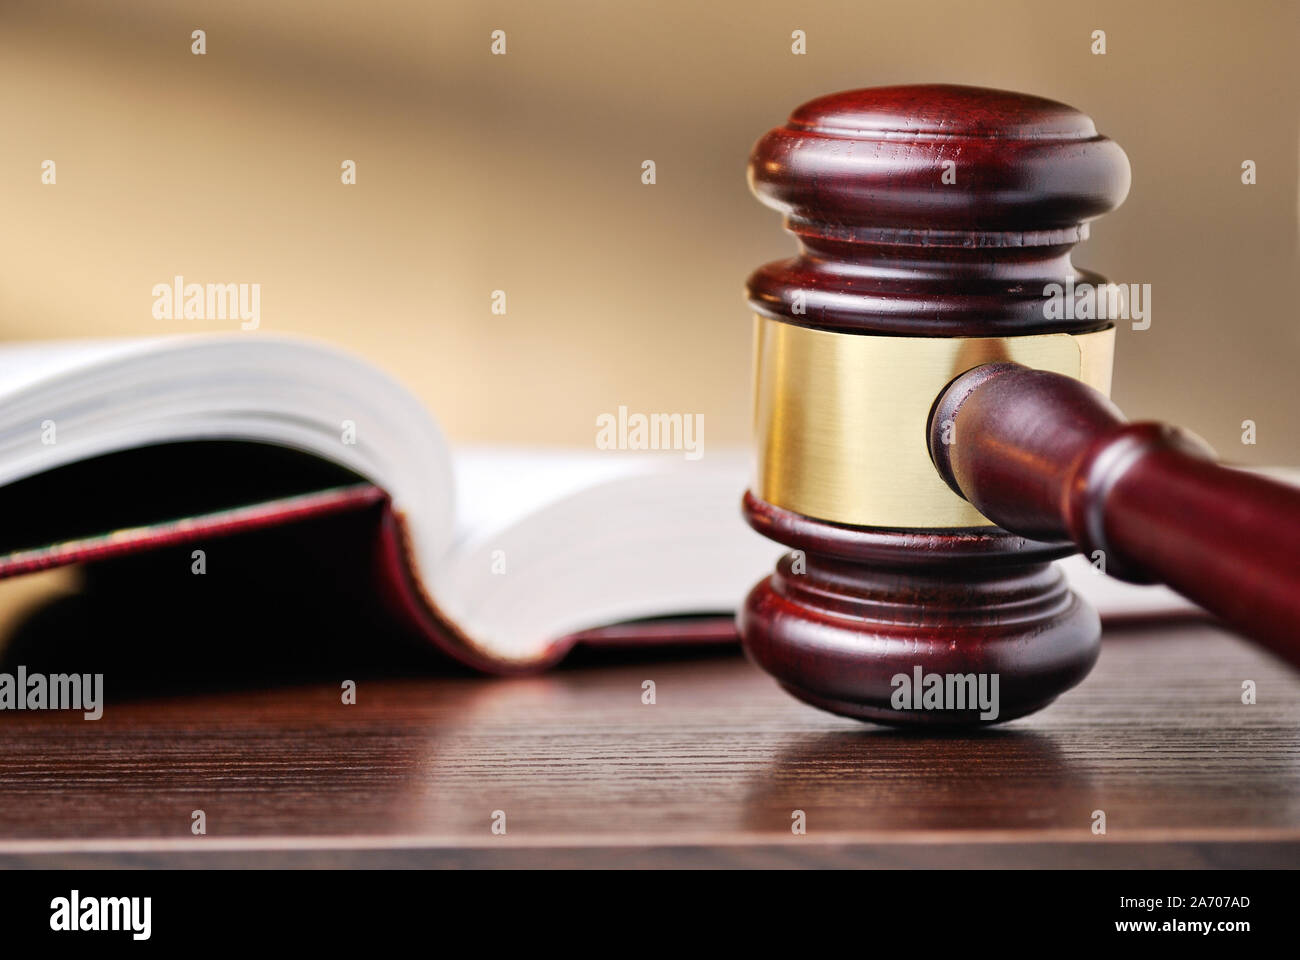 Judges wooden gavel with a brass band around the mallet standing upright on a wooden counter top alongside a law book conceptual of judgements and law Stock Photo